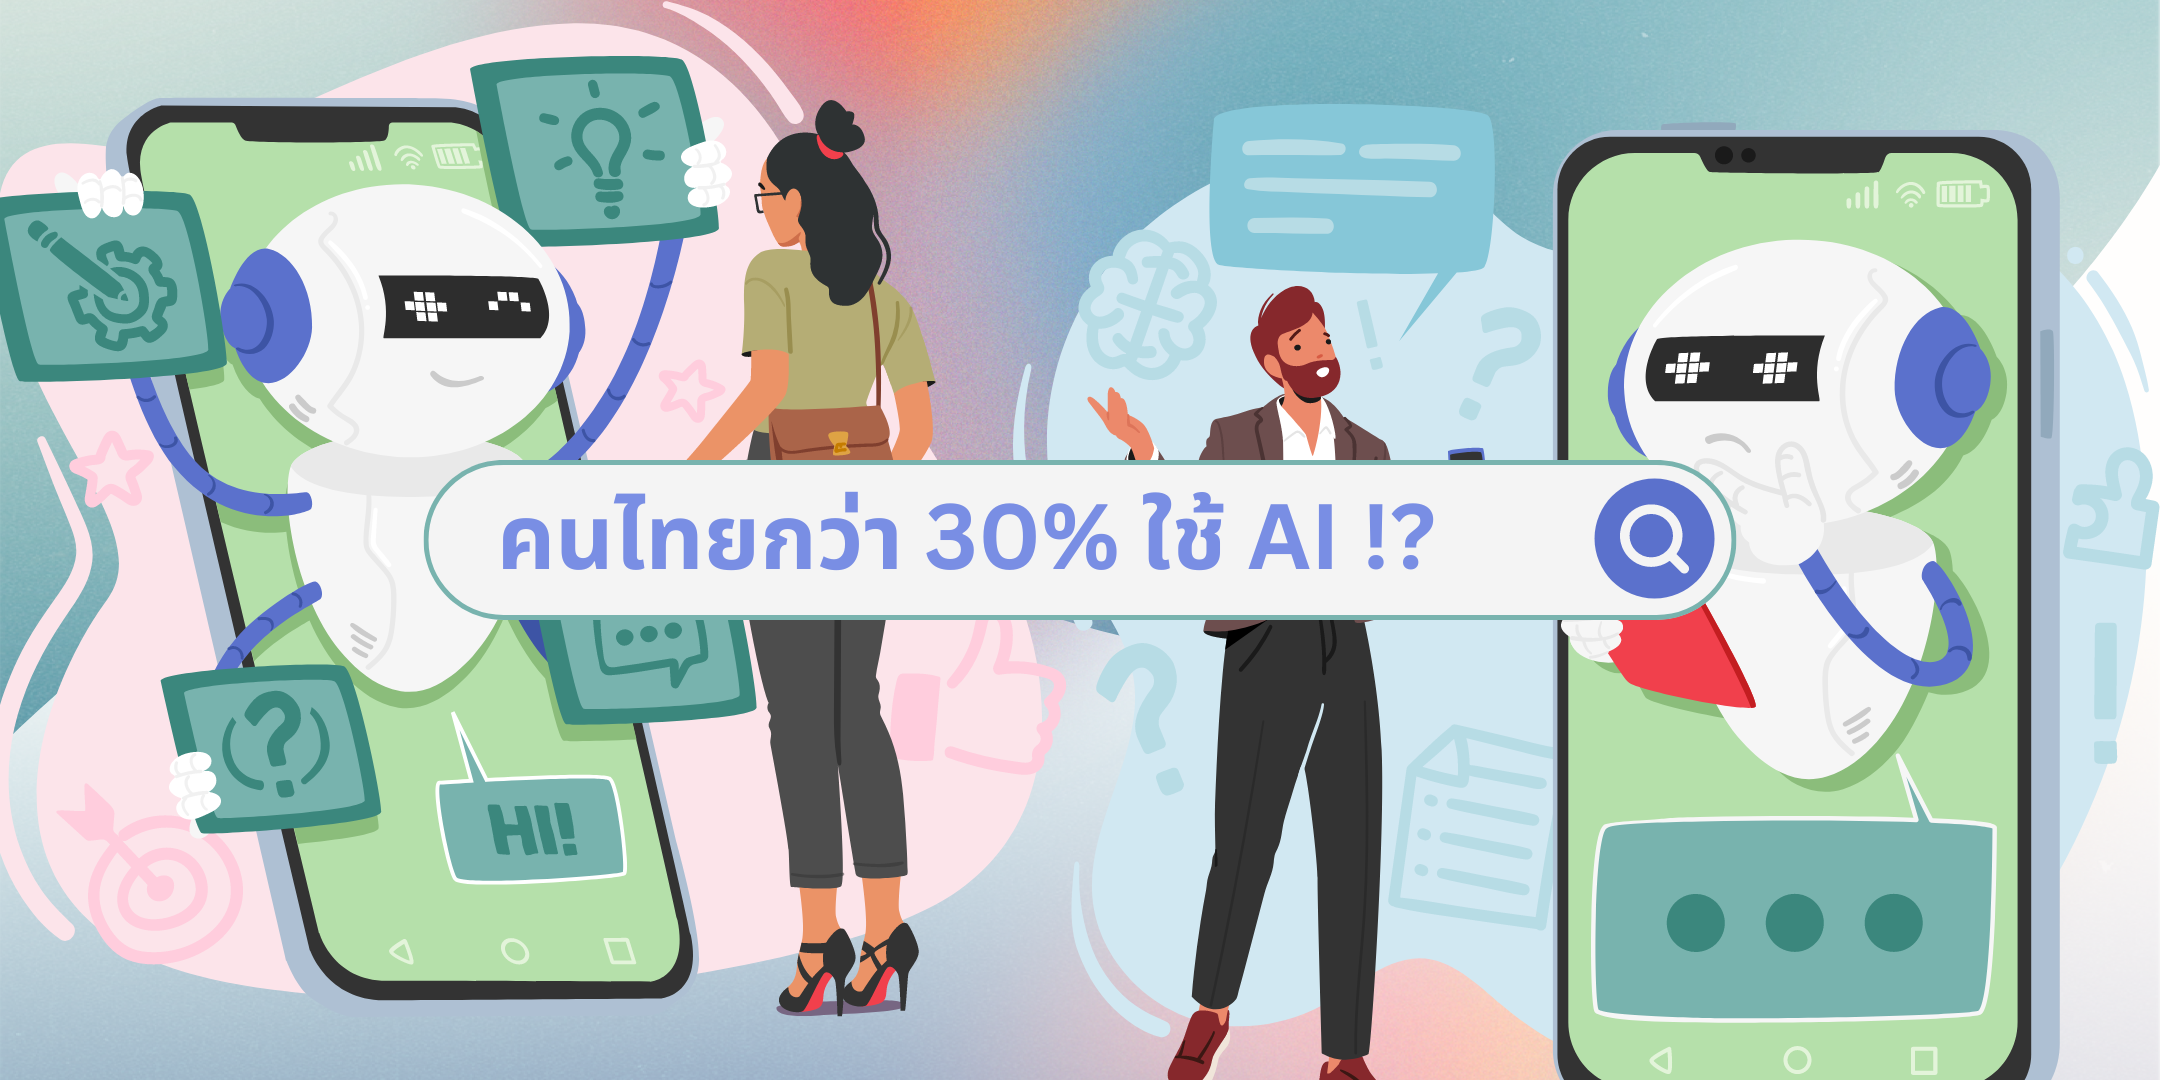 Will more than 30% of Thai people use AI